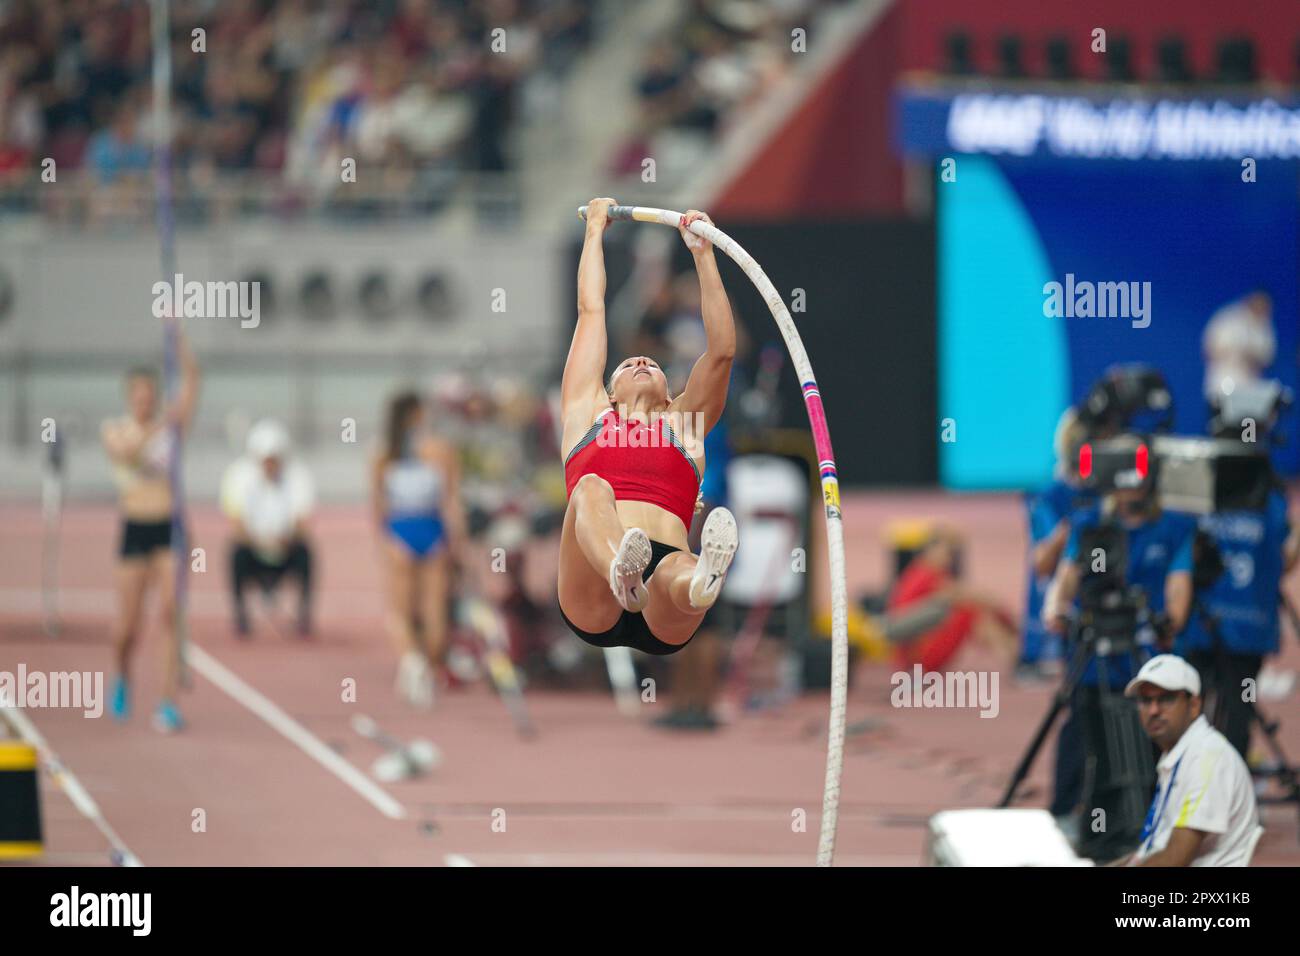 Angelica Moser Participating In The Pole Vault At The Doha World